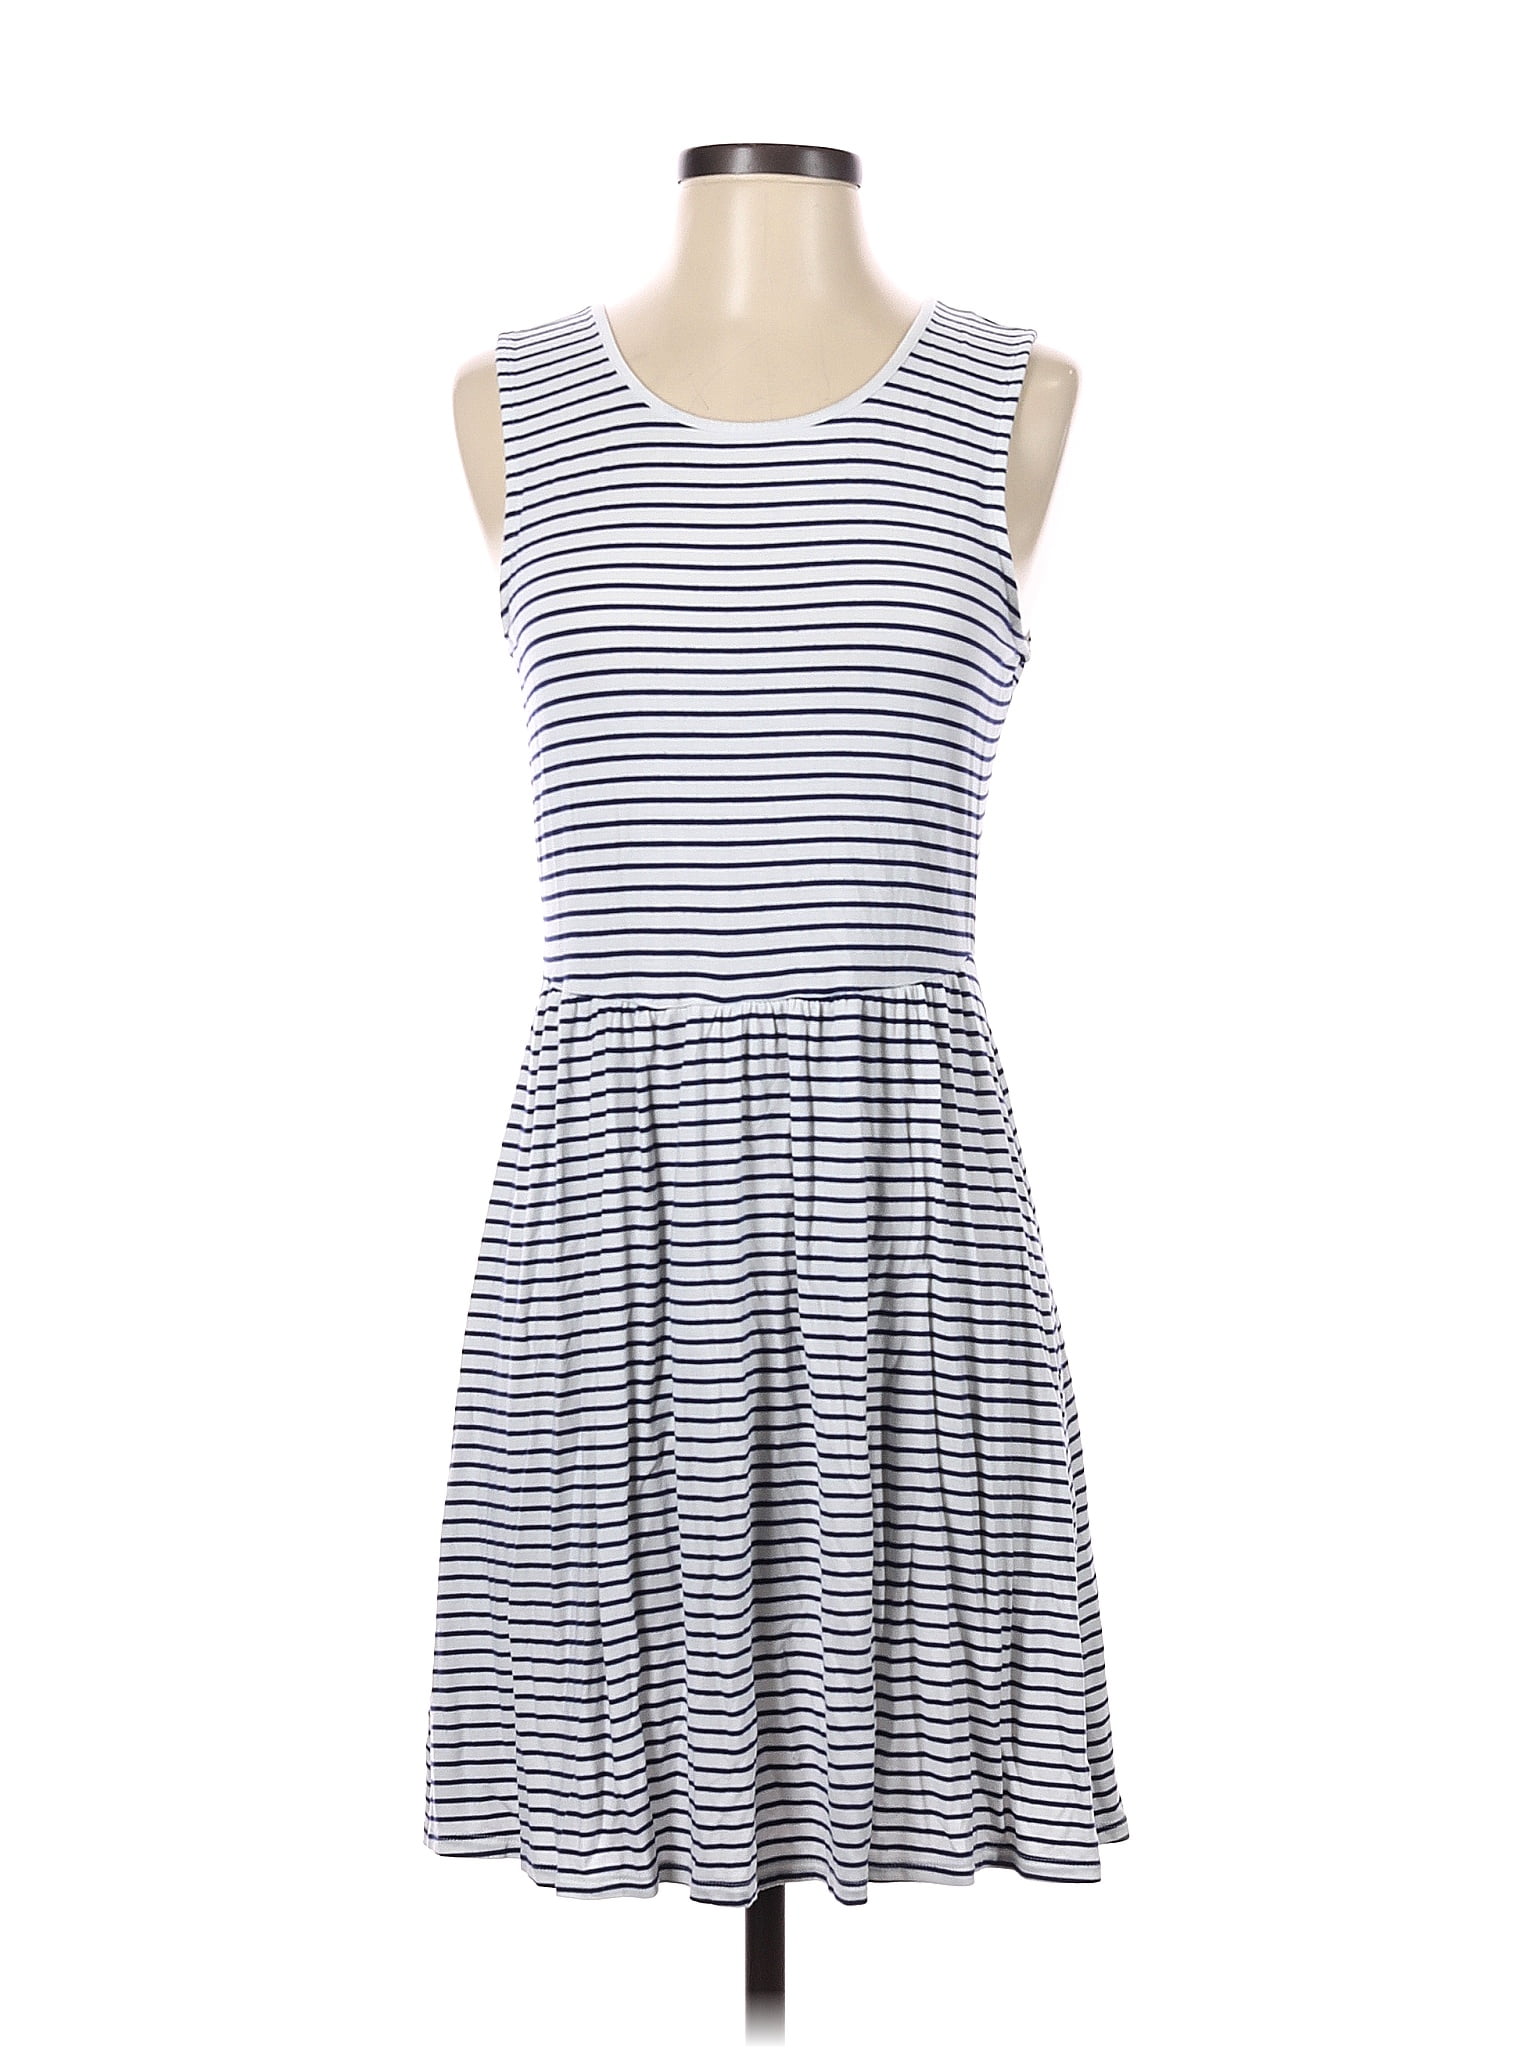 Old Navy Women's Dresses On Sale Up To 90% Off Retail | ThredUp